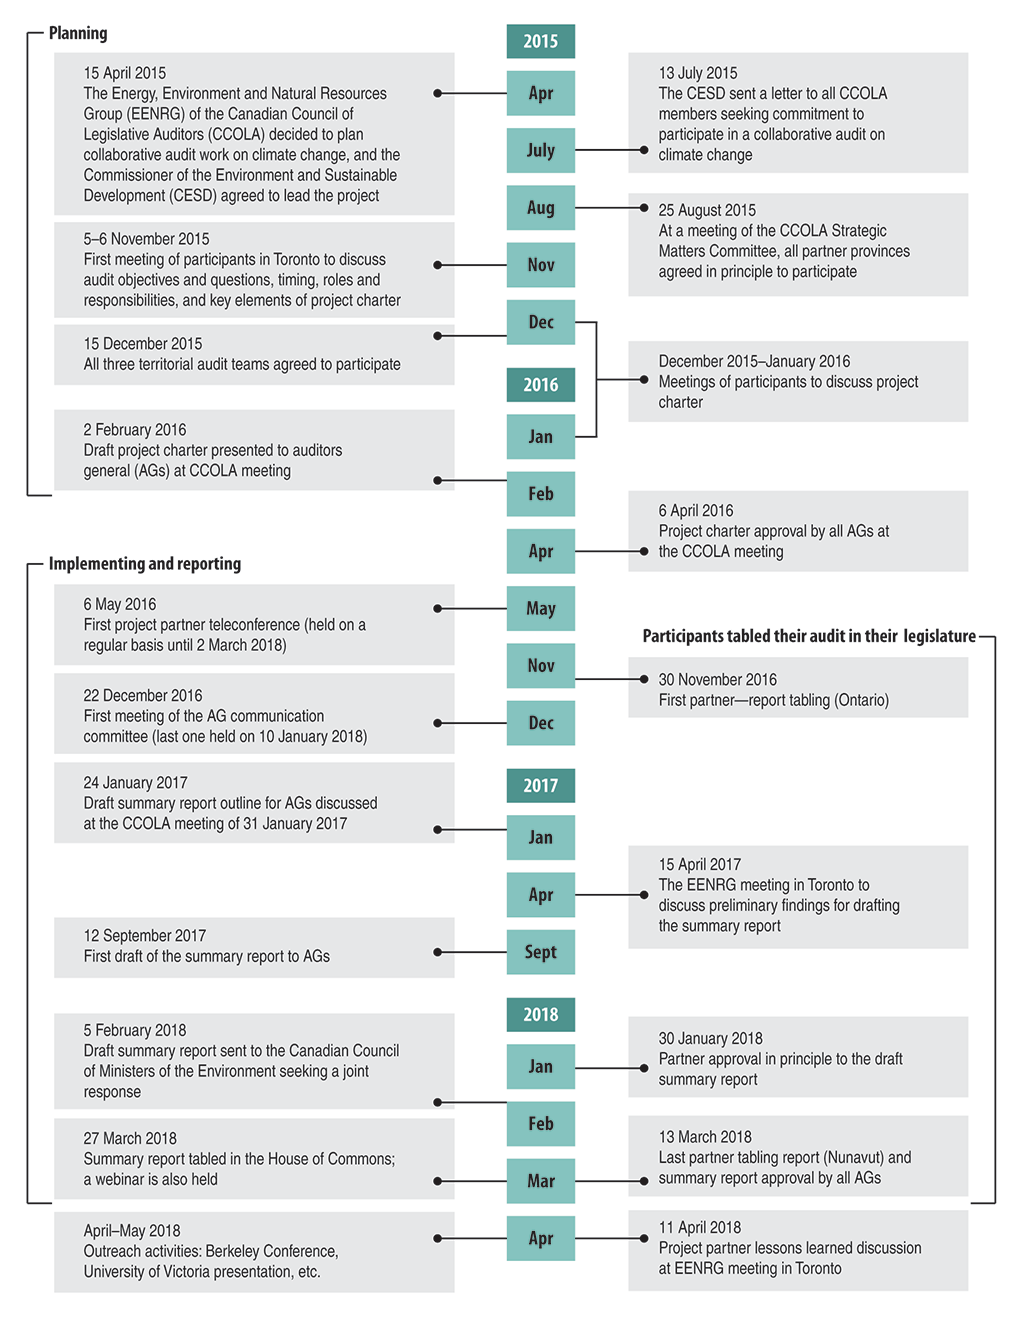 Timeline of key steps in the collaborative audit project